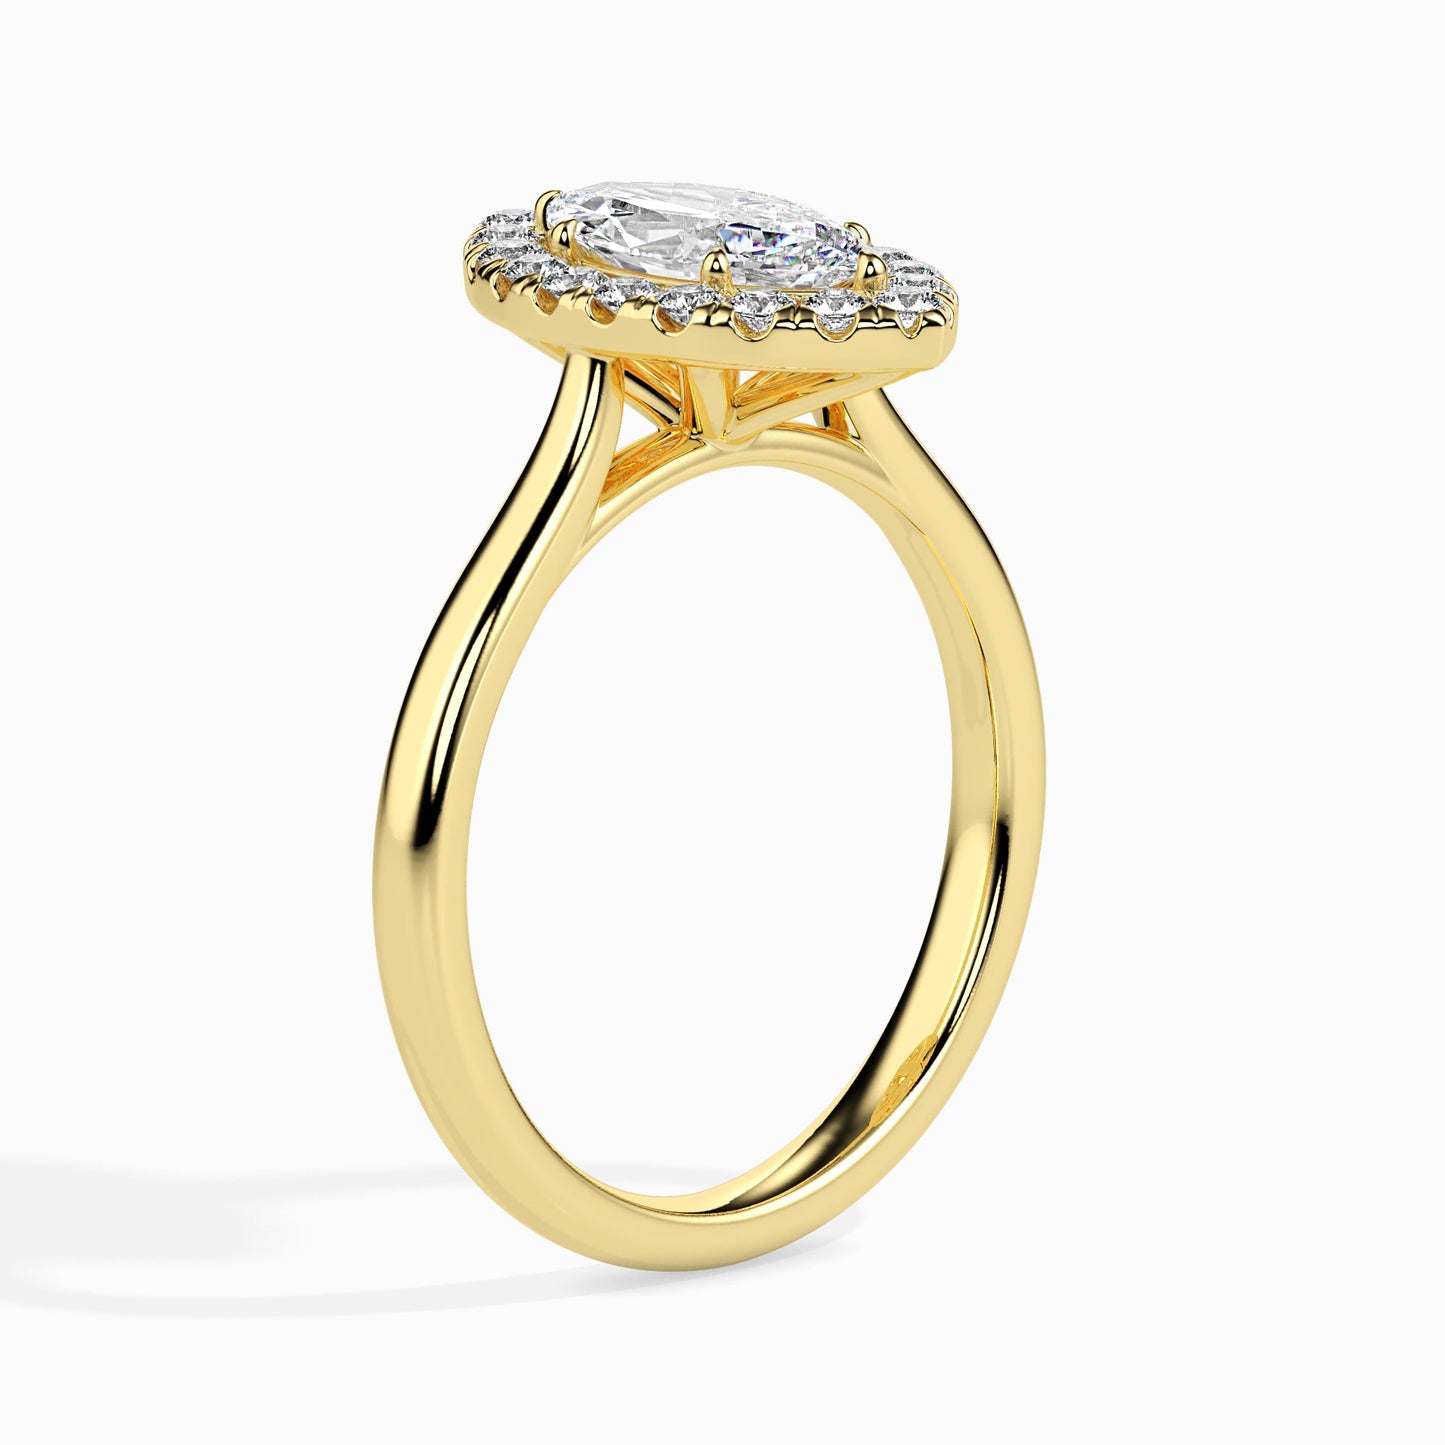 Solitaire Engagement Diamond Ring in 18 karat Yellow Gold by Fiona Diamonds